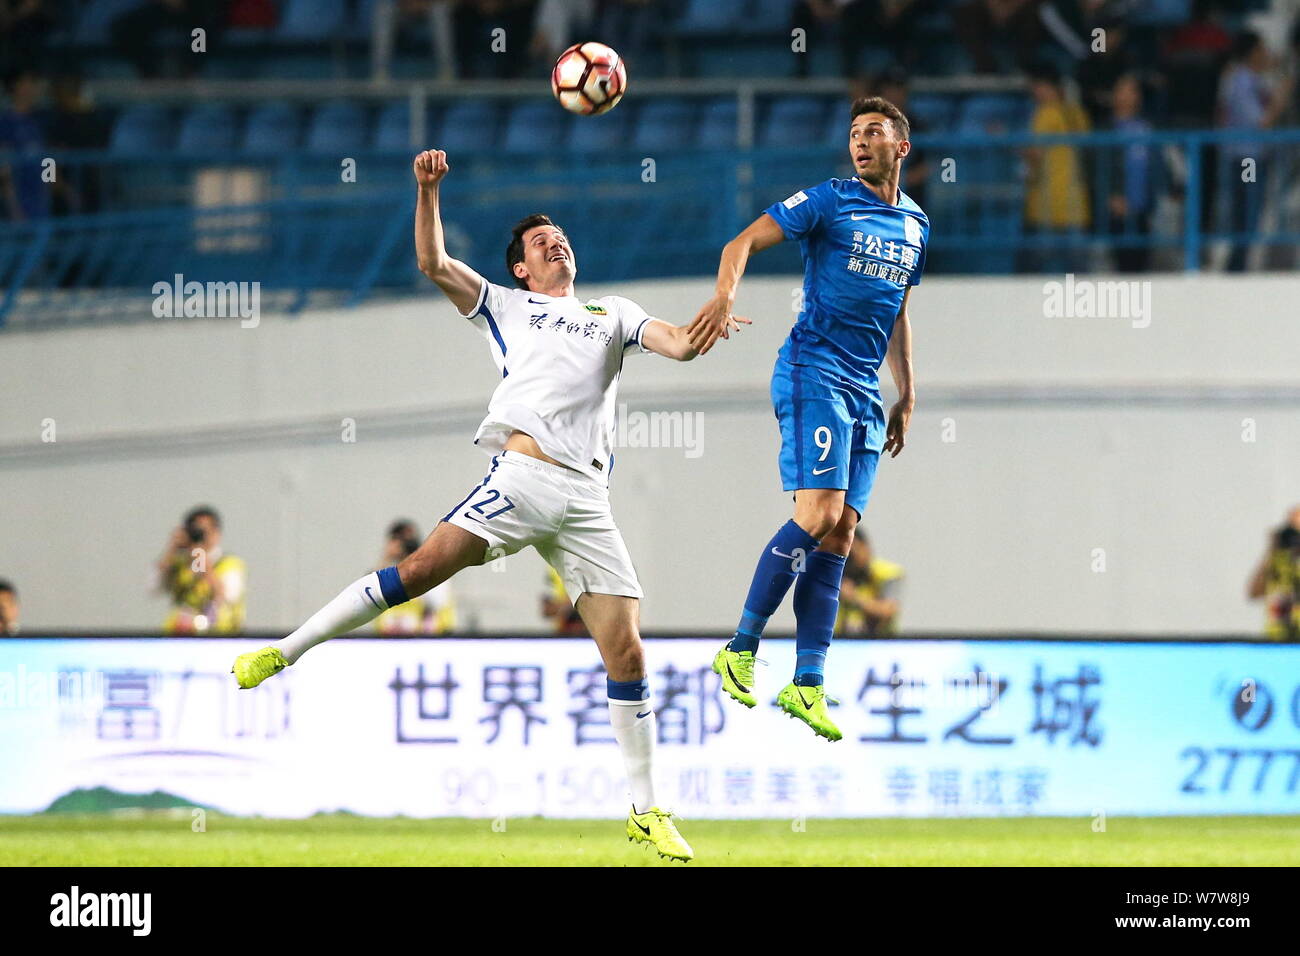 Greek Australian football player Apostolos Giannou of Guangzhou R&F, right, challenges Australian football player Ryan McGowan of Guizhou Zhicheng in Stock Photo